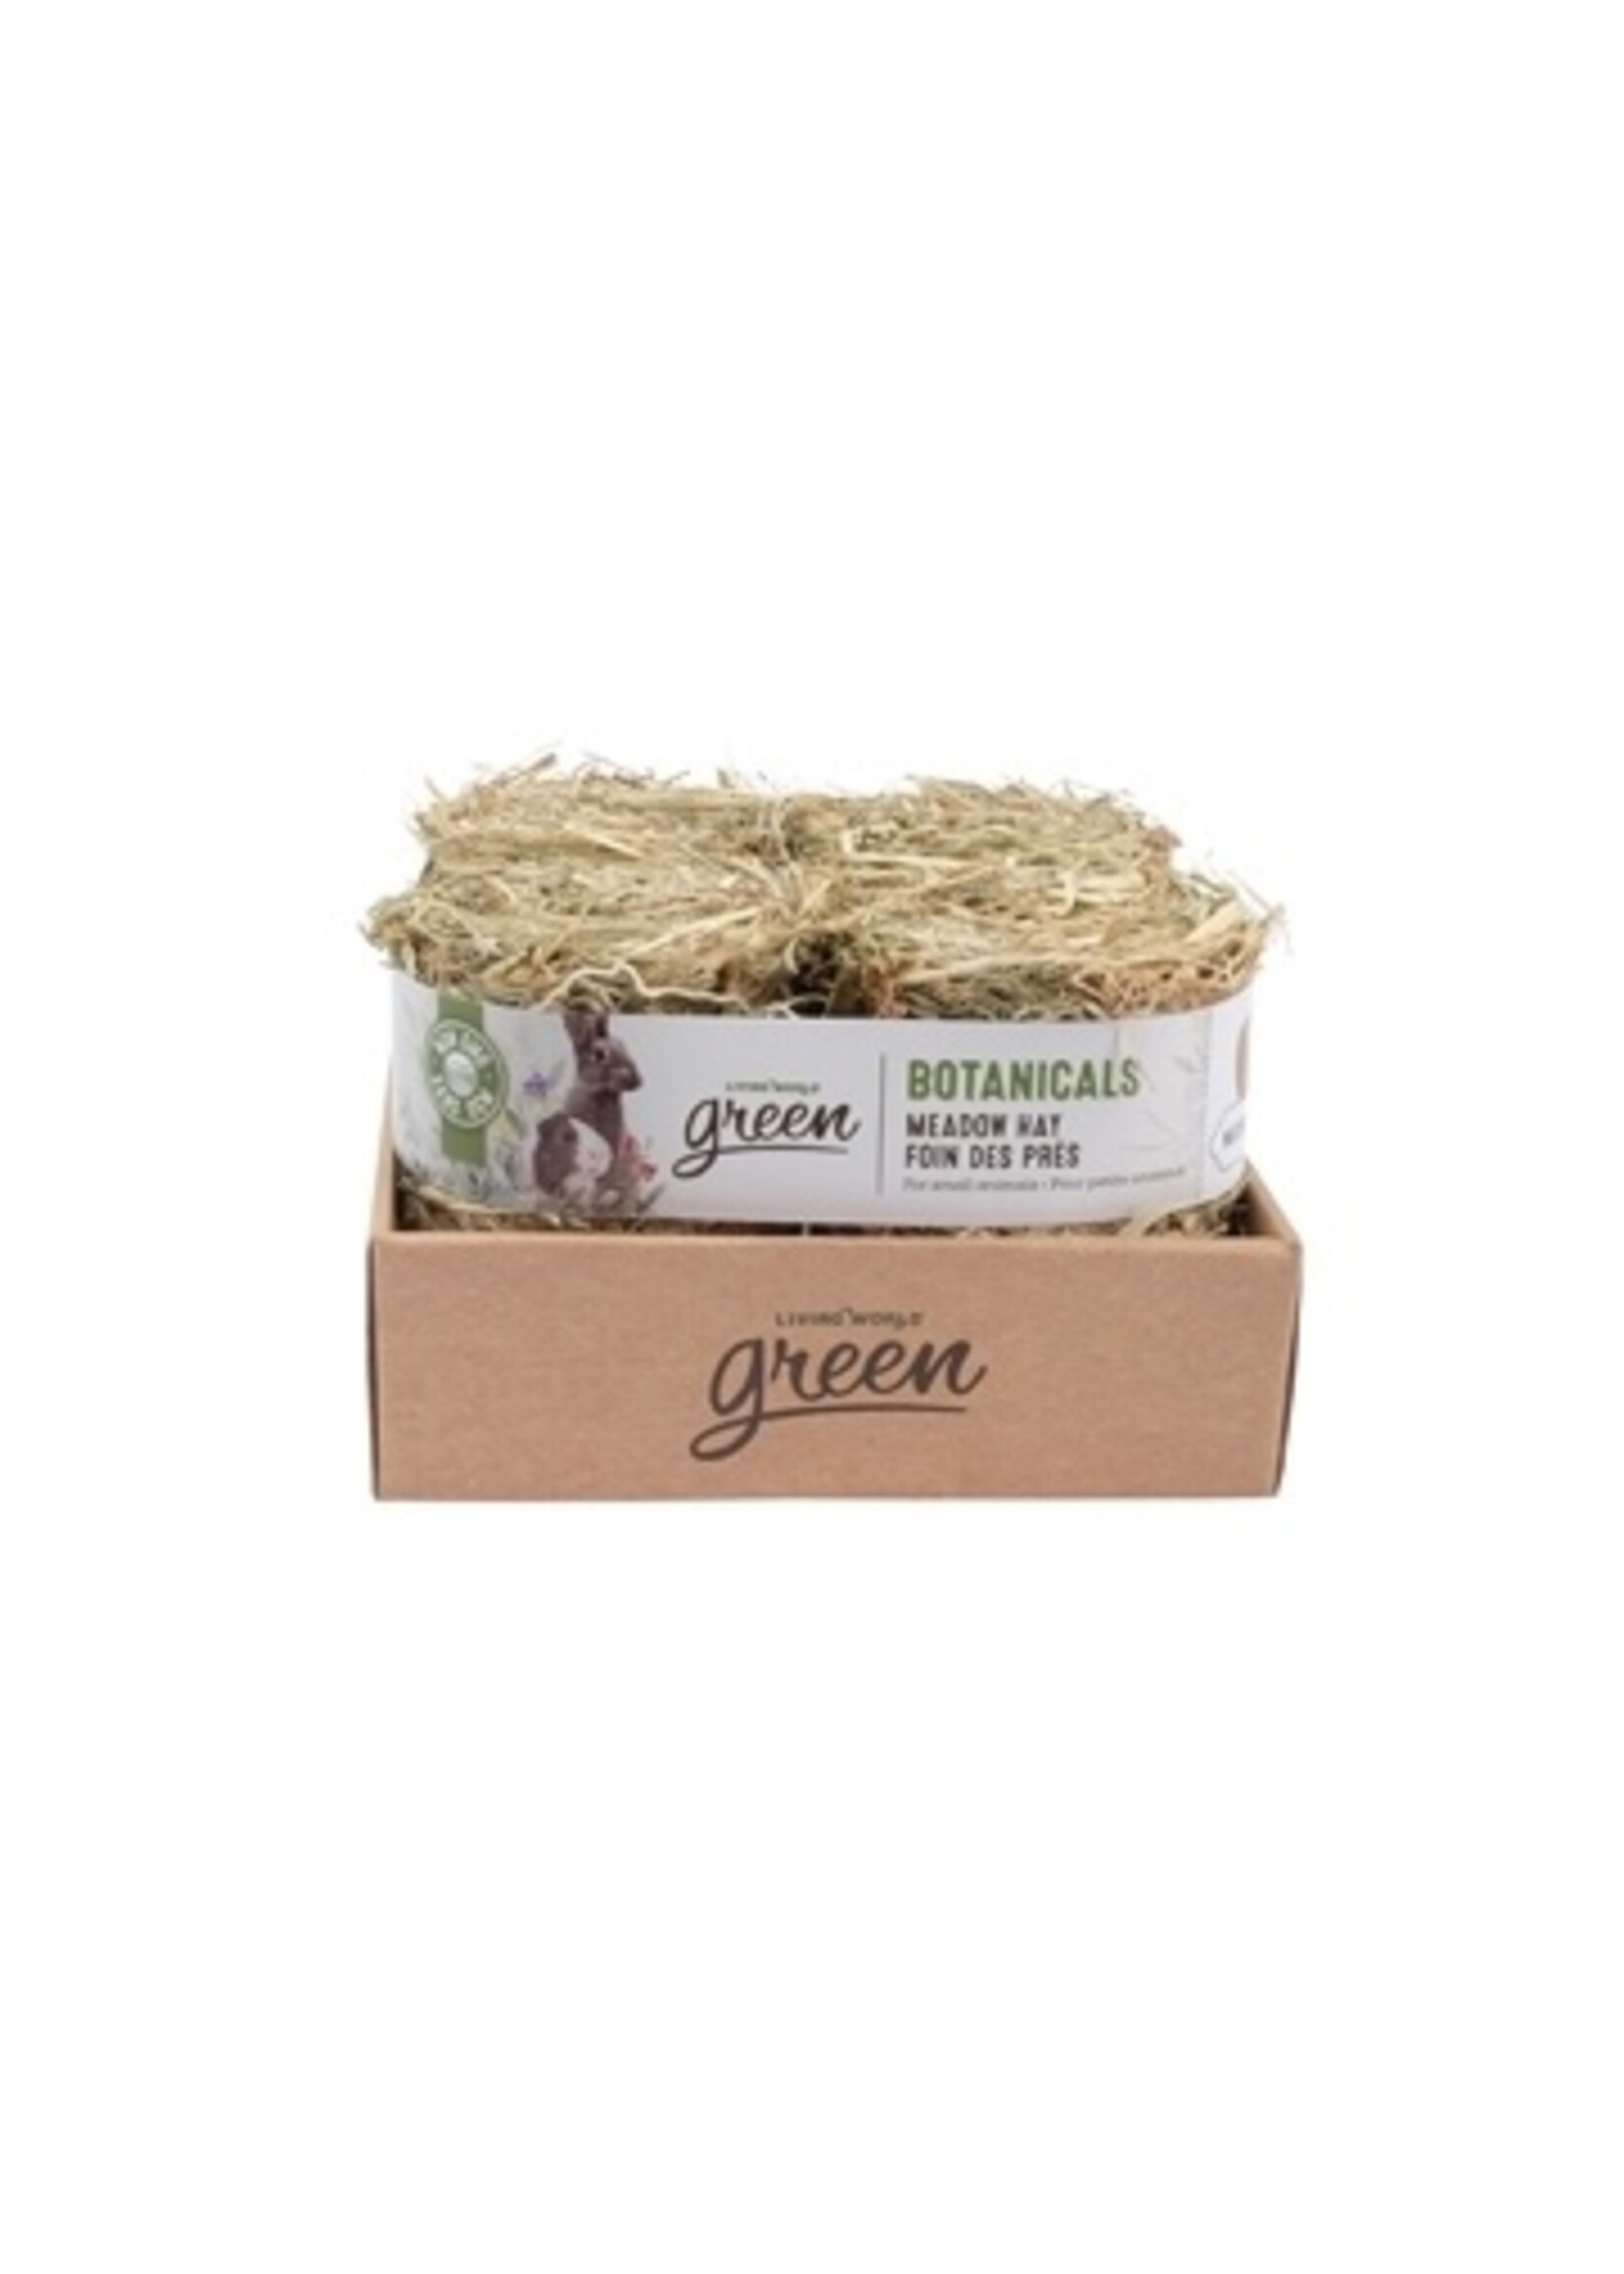 Living World Living World Green Botanicals Meadow Hay Bales 4pack